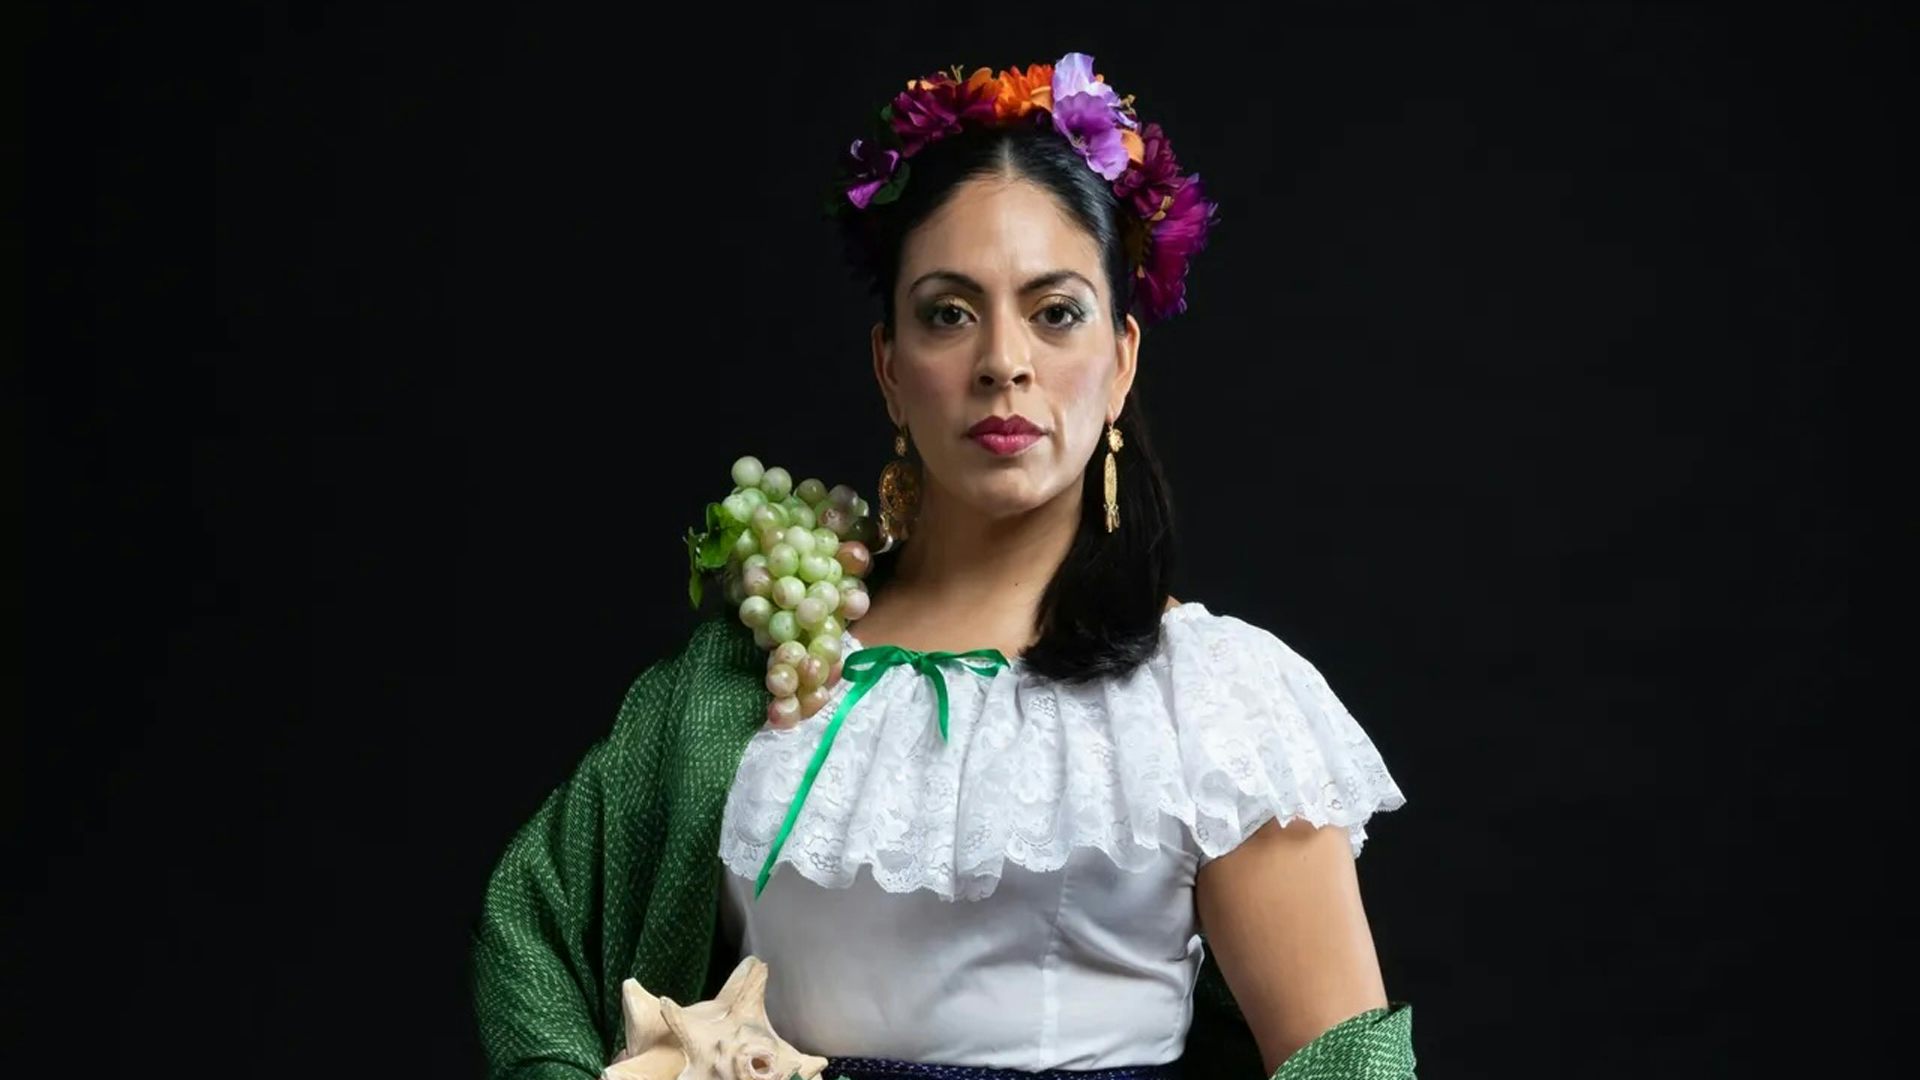 A person with dark hair wears a colorful flower crown, gold earrings, green grapes on their right shoulder and a white blouse while looking straight ahead